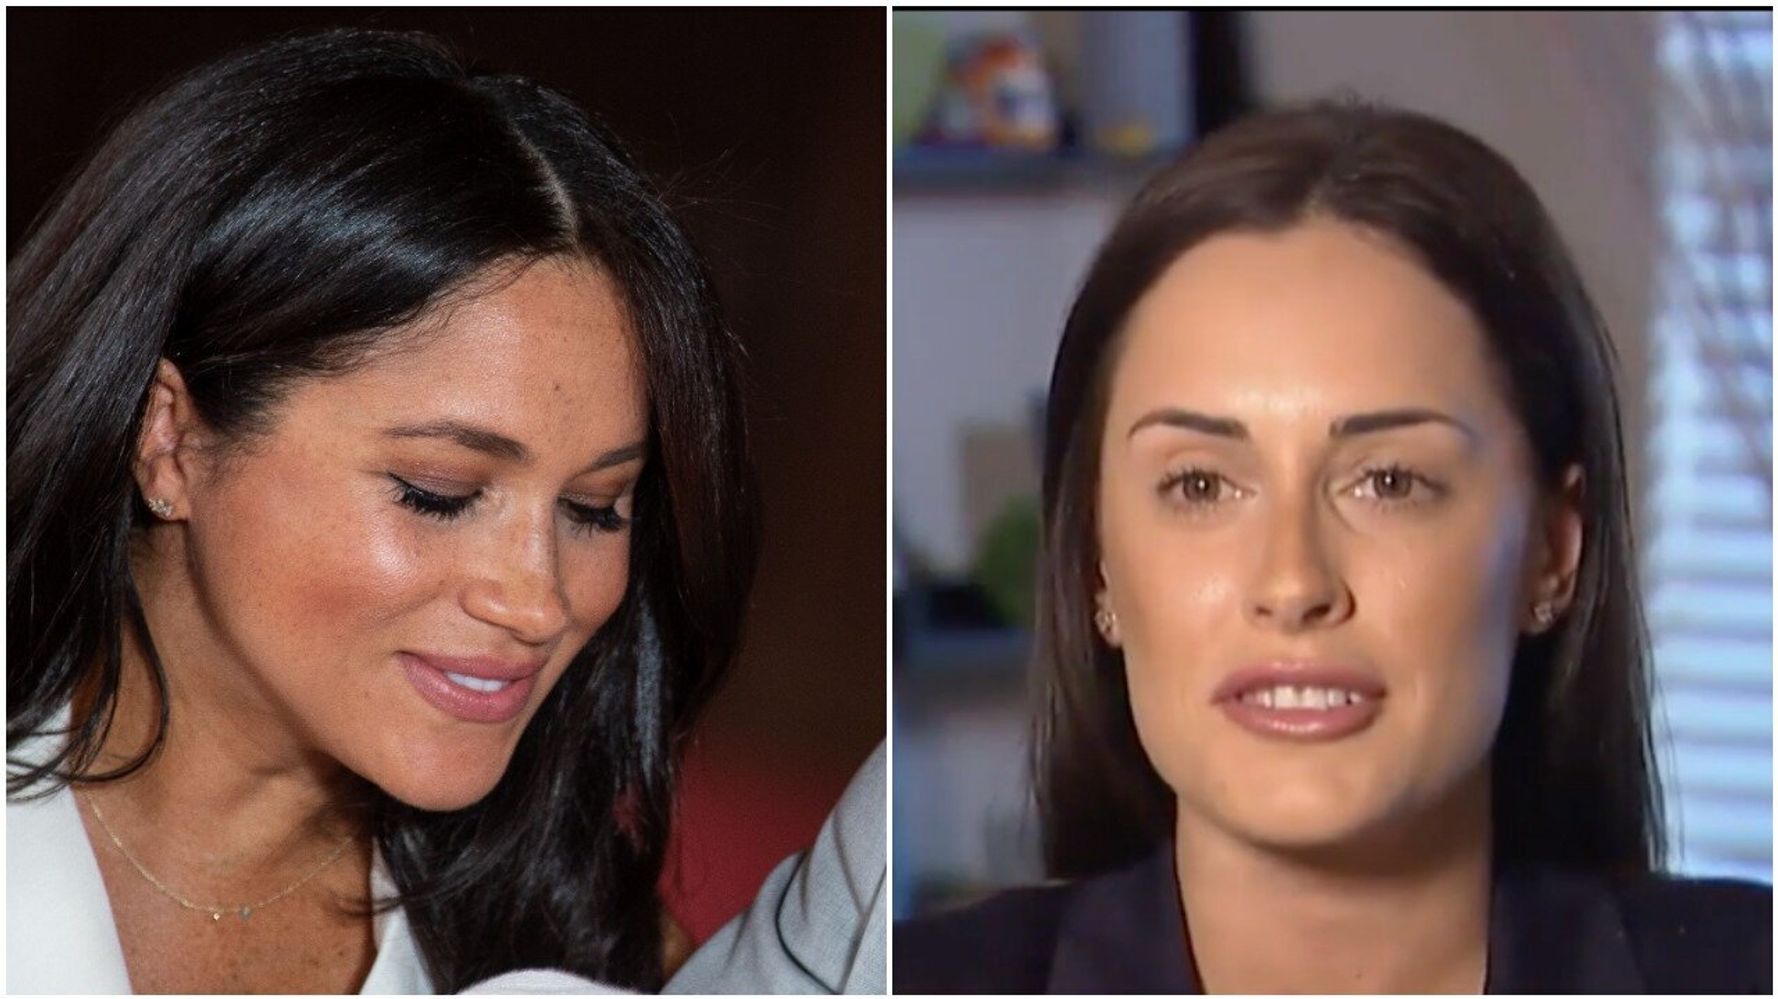 Woman Spends 6 Hours In Surgery Hoping To Look Like Meghan Markle